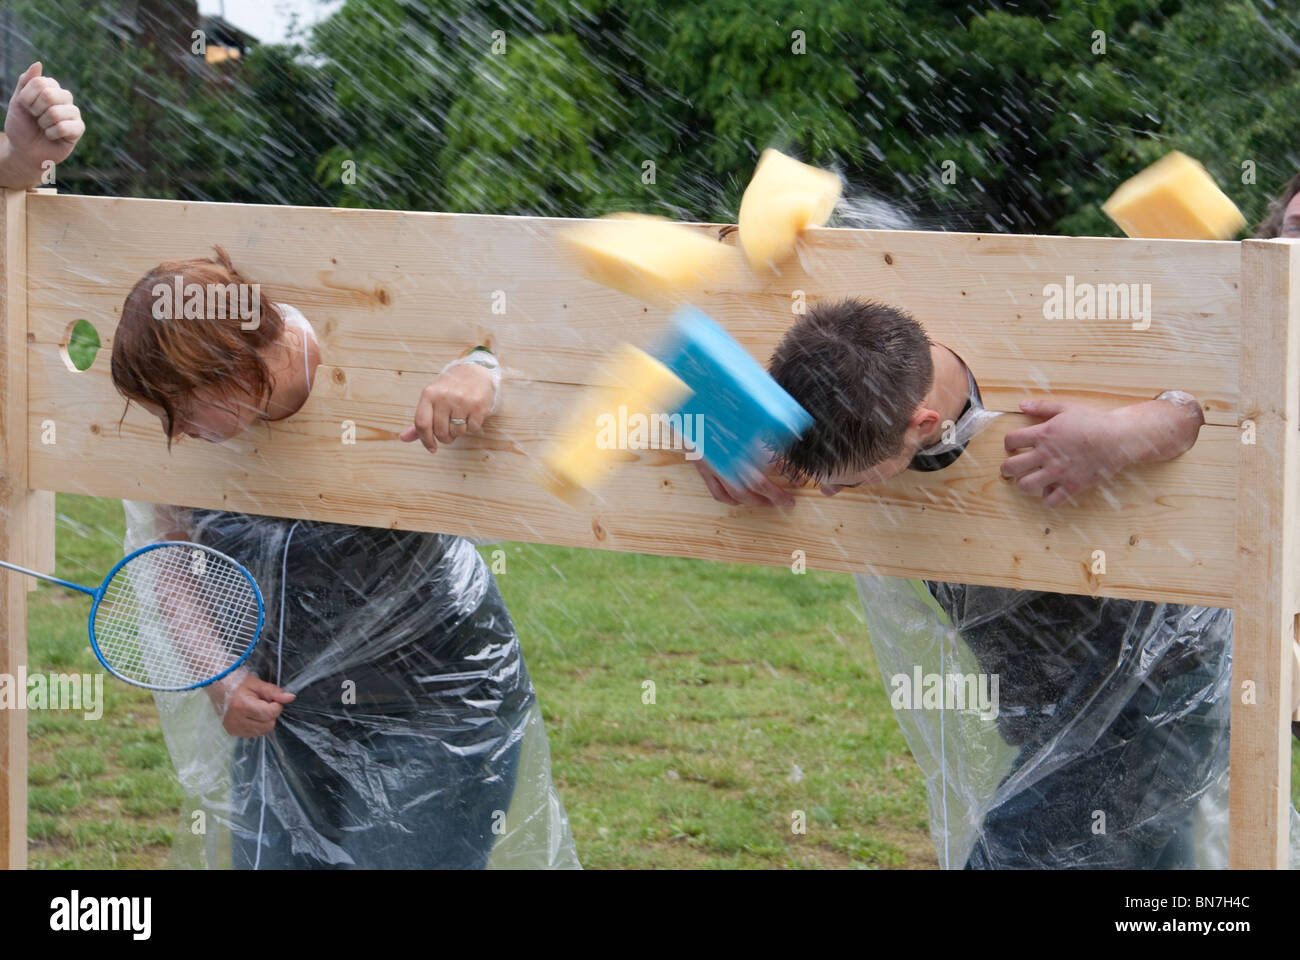 Throwing sponges at people in stocks as team building exercise Stock Photo